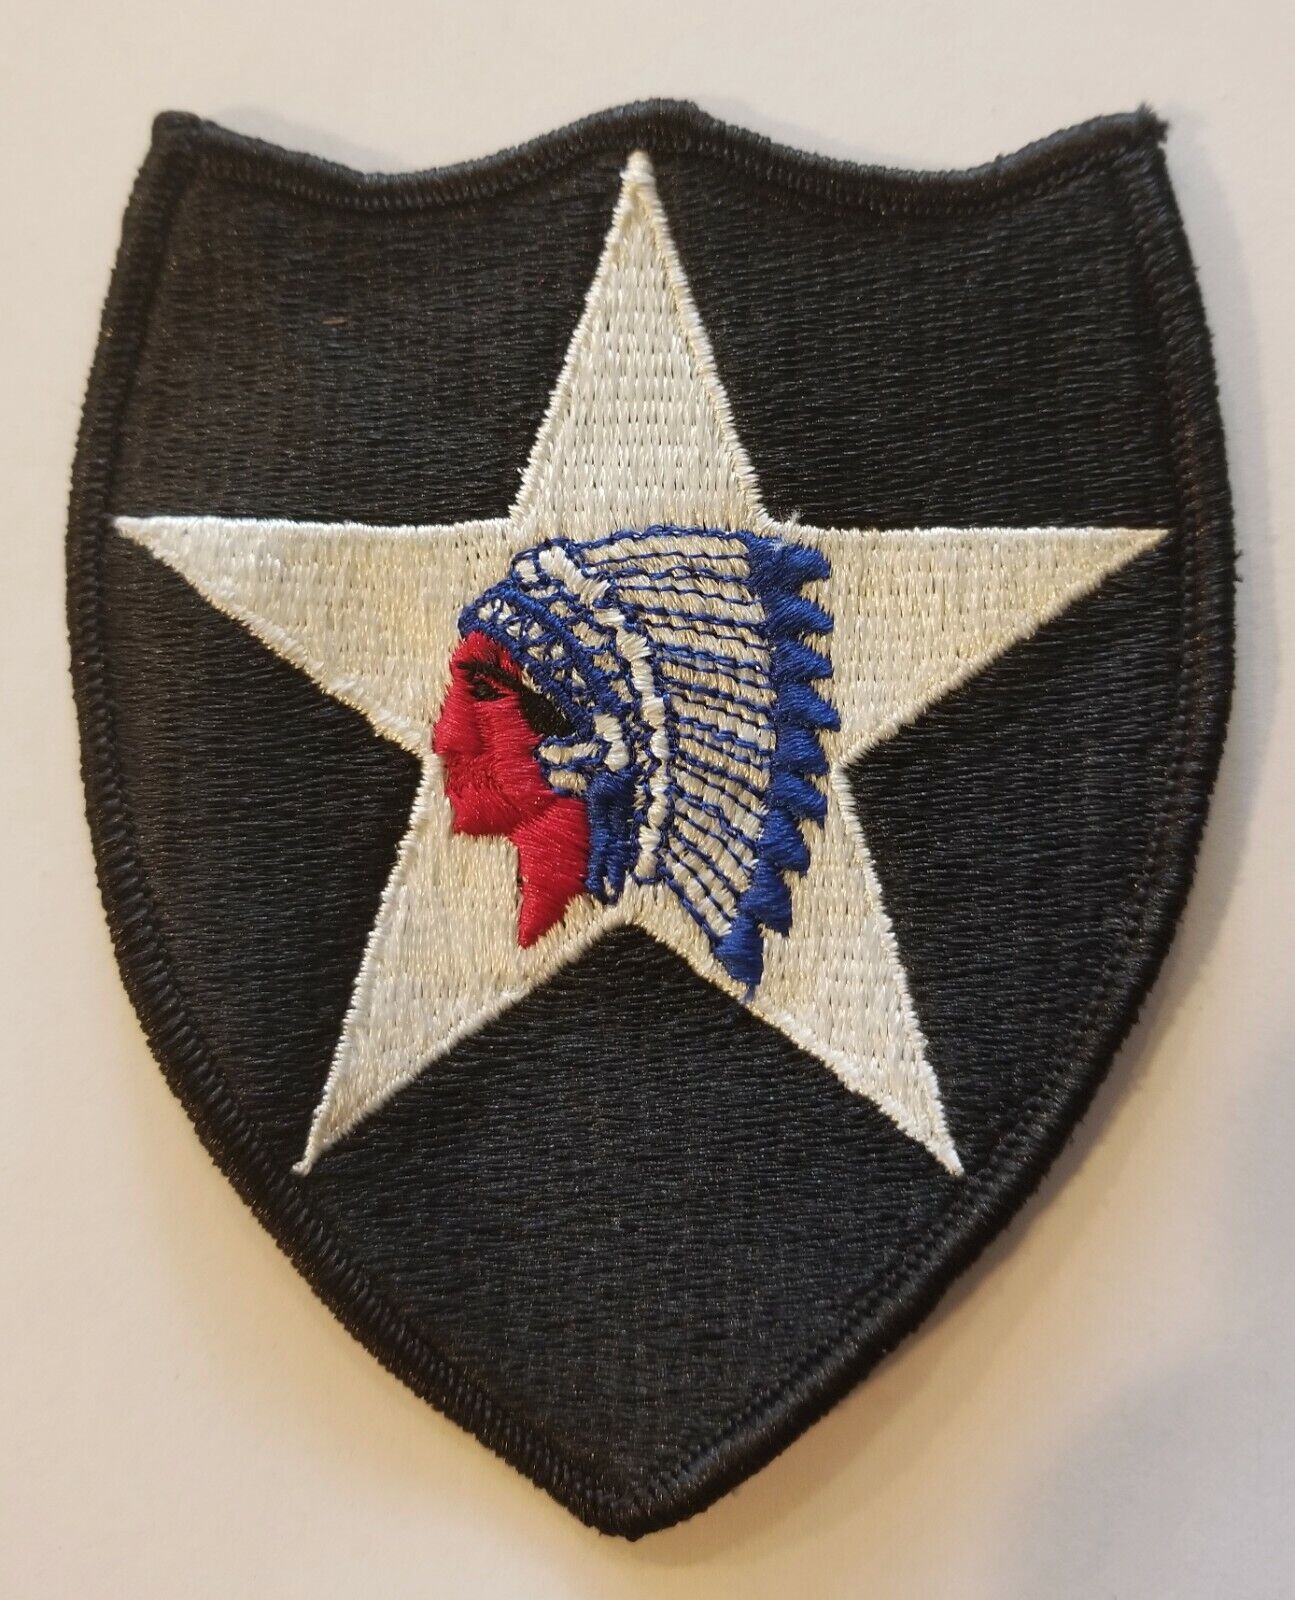 US ARMY 2ND INFANTRY DIVISION THE BIG INDIAN PATCH - US GOVERNMENT ISSUE USGI